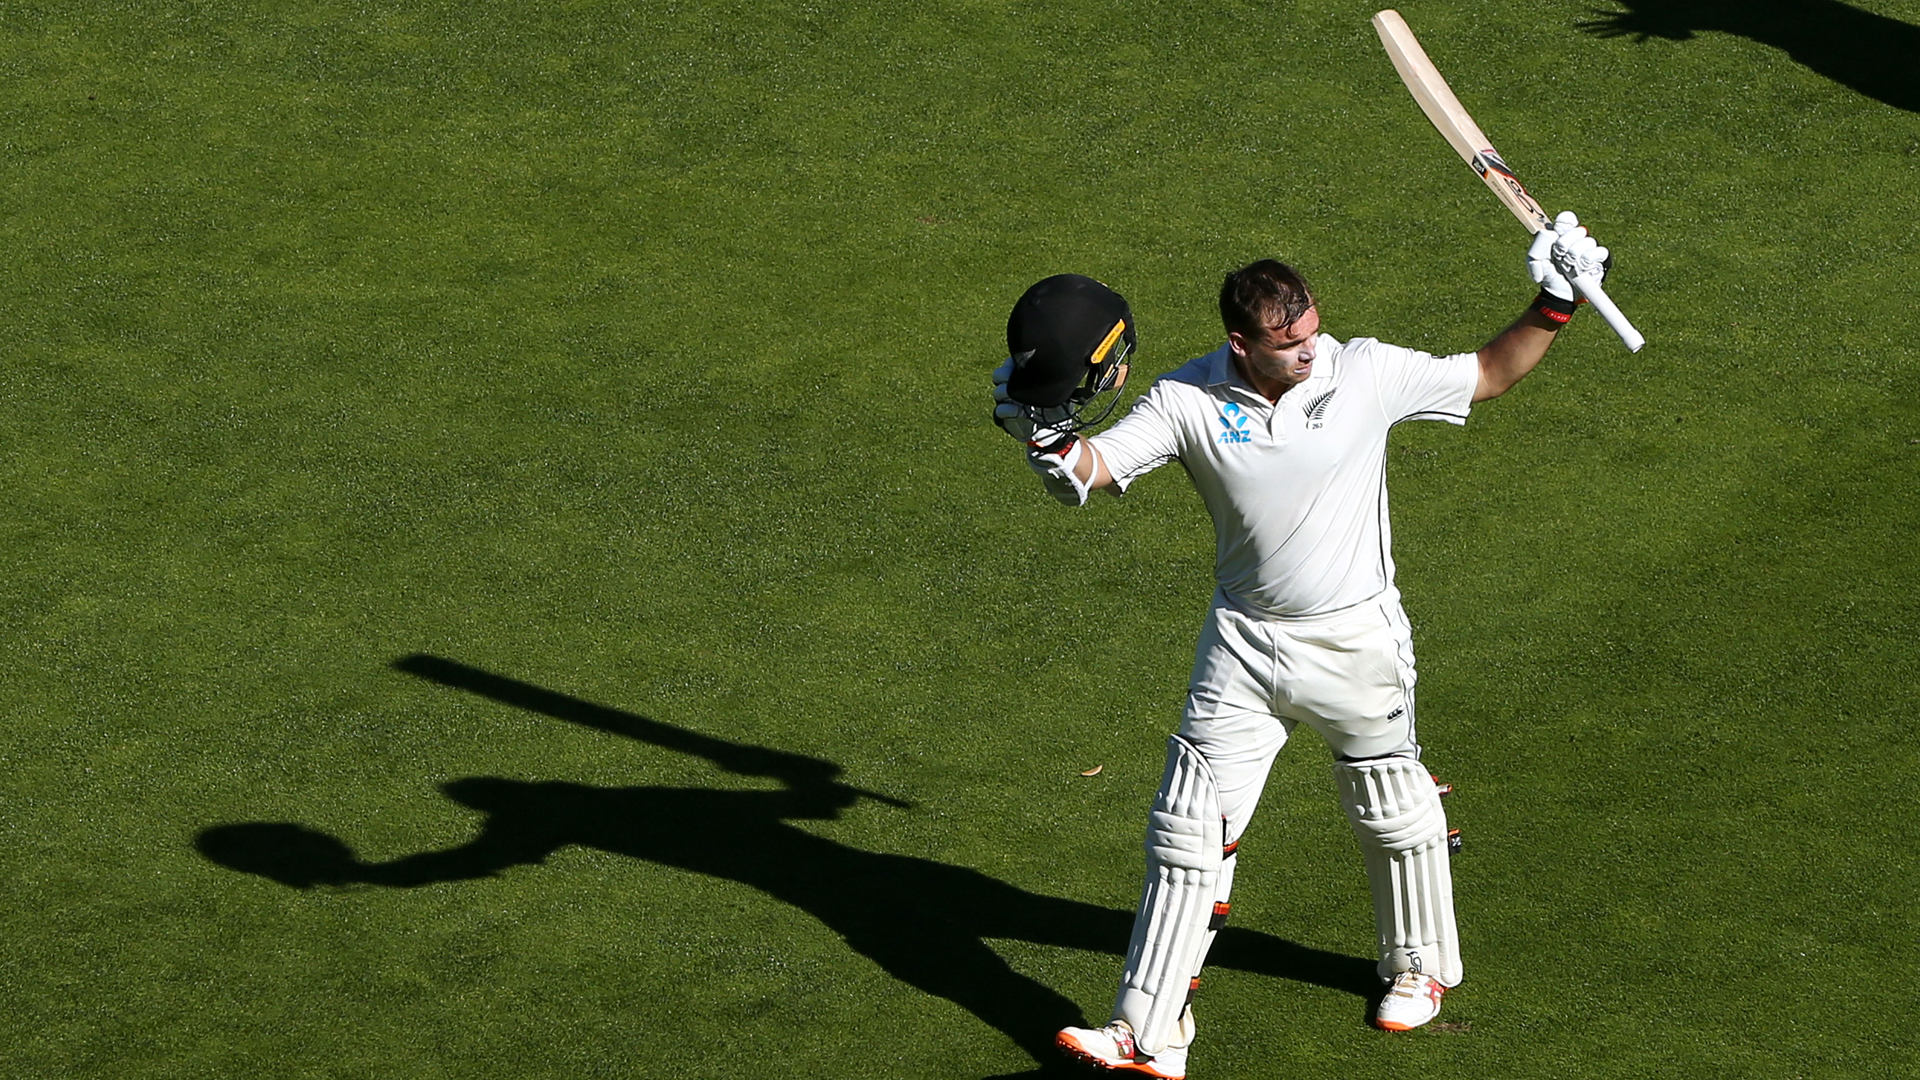 New Zealand continued their dominance of Sri Lanka in the first Test in Wellington.